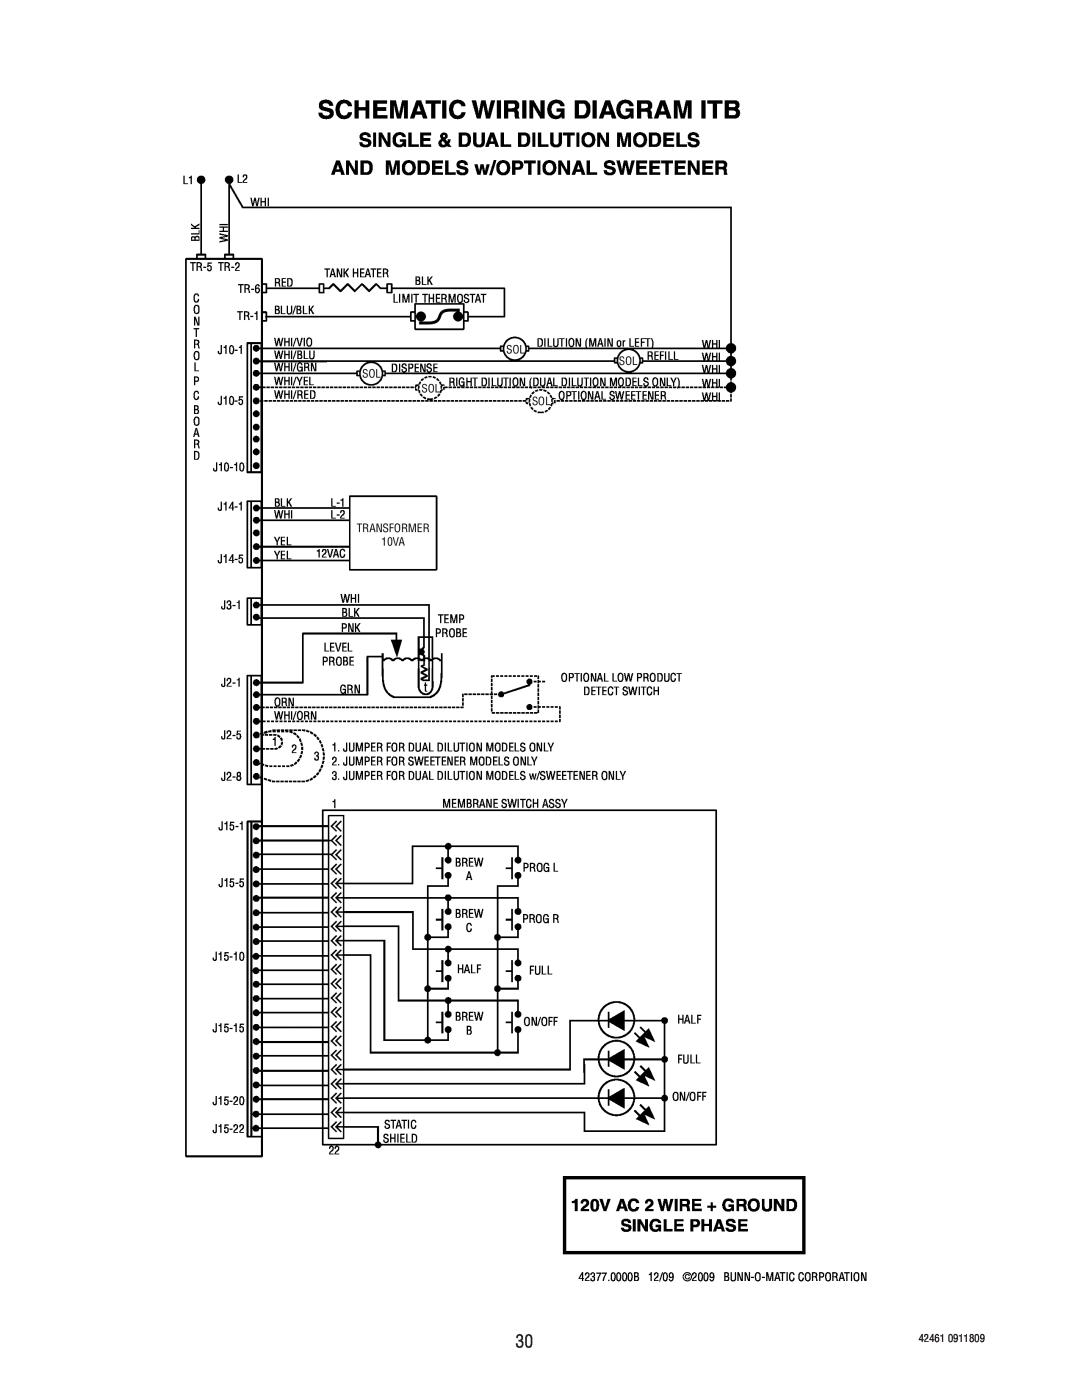 Bunn ICB/TWIN, ITB/ITCB manual Schematic Wiring Diagram Itb, SINGLE & DUAL DILUTION MODELS AND MODELS w/OPTIONAL SWEETENER 